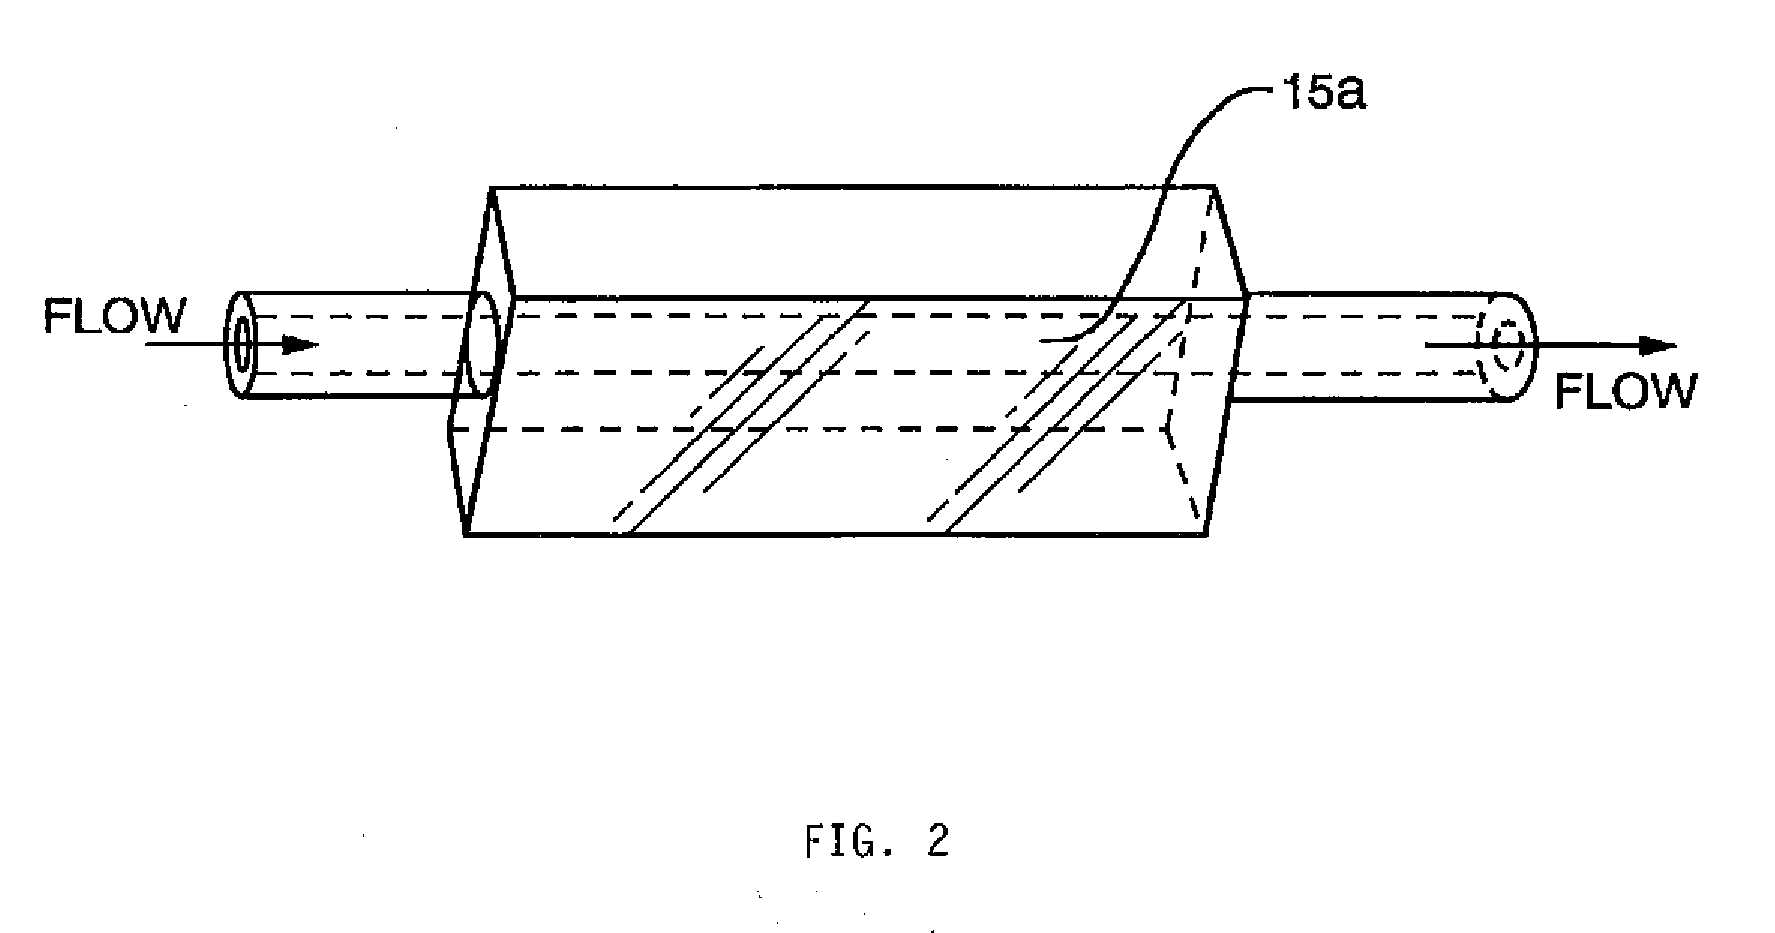 System and method for monitoring blue-green algae in a fluid